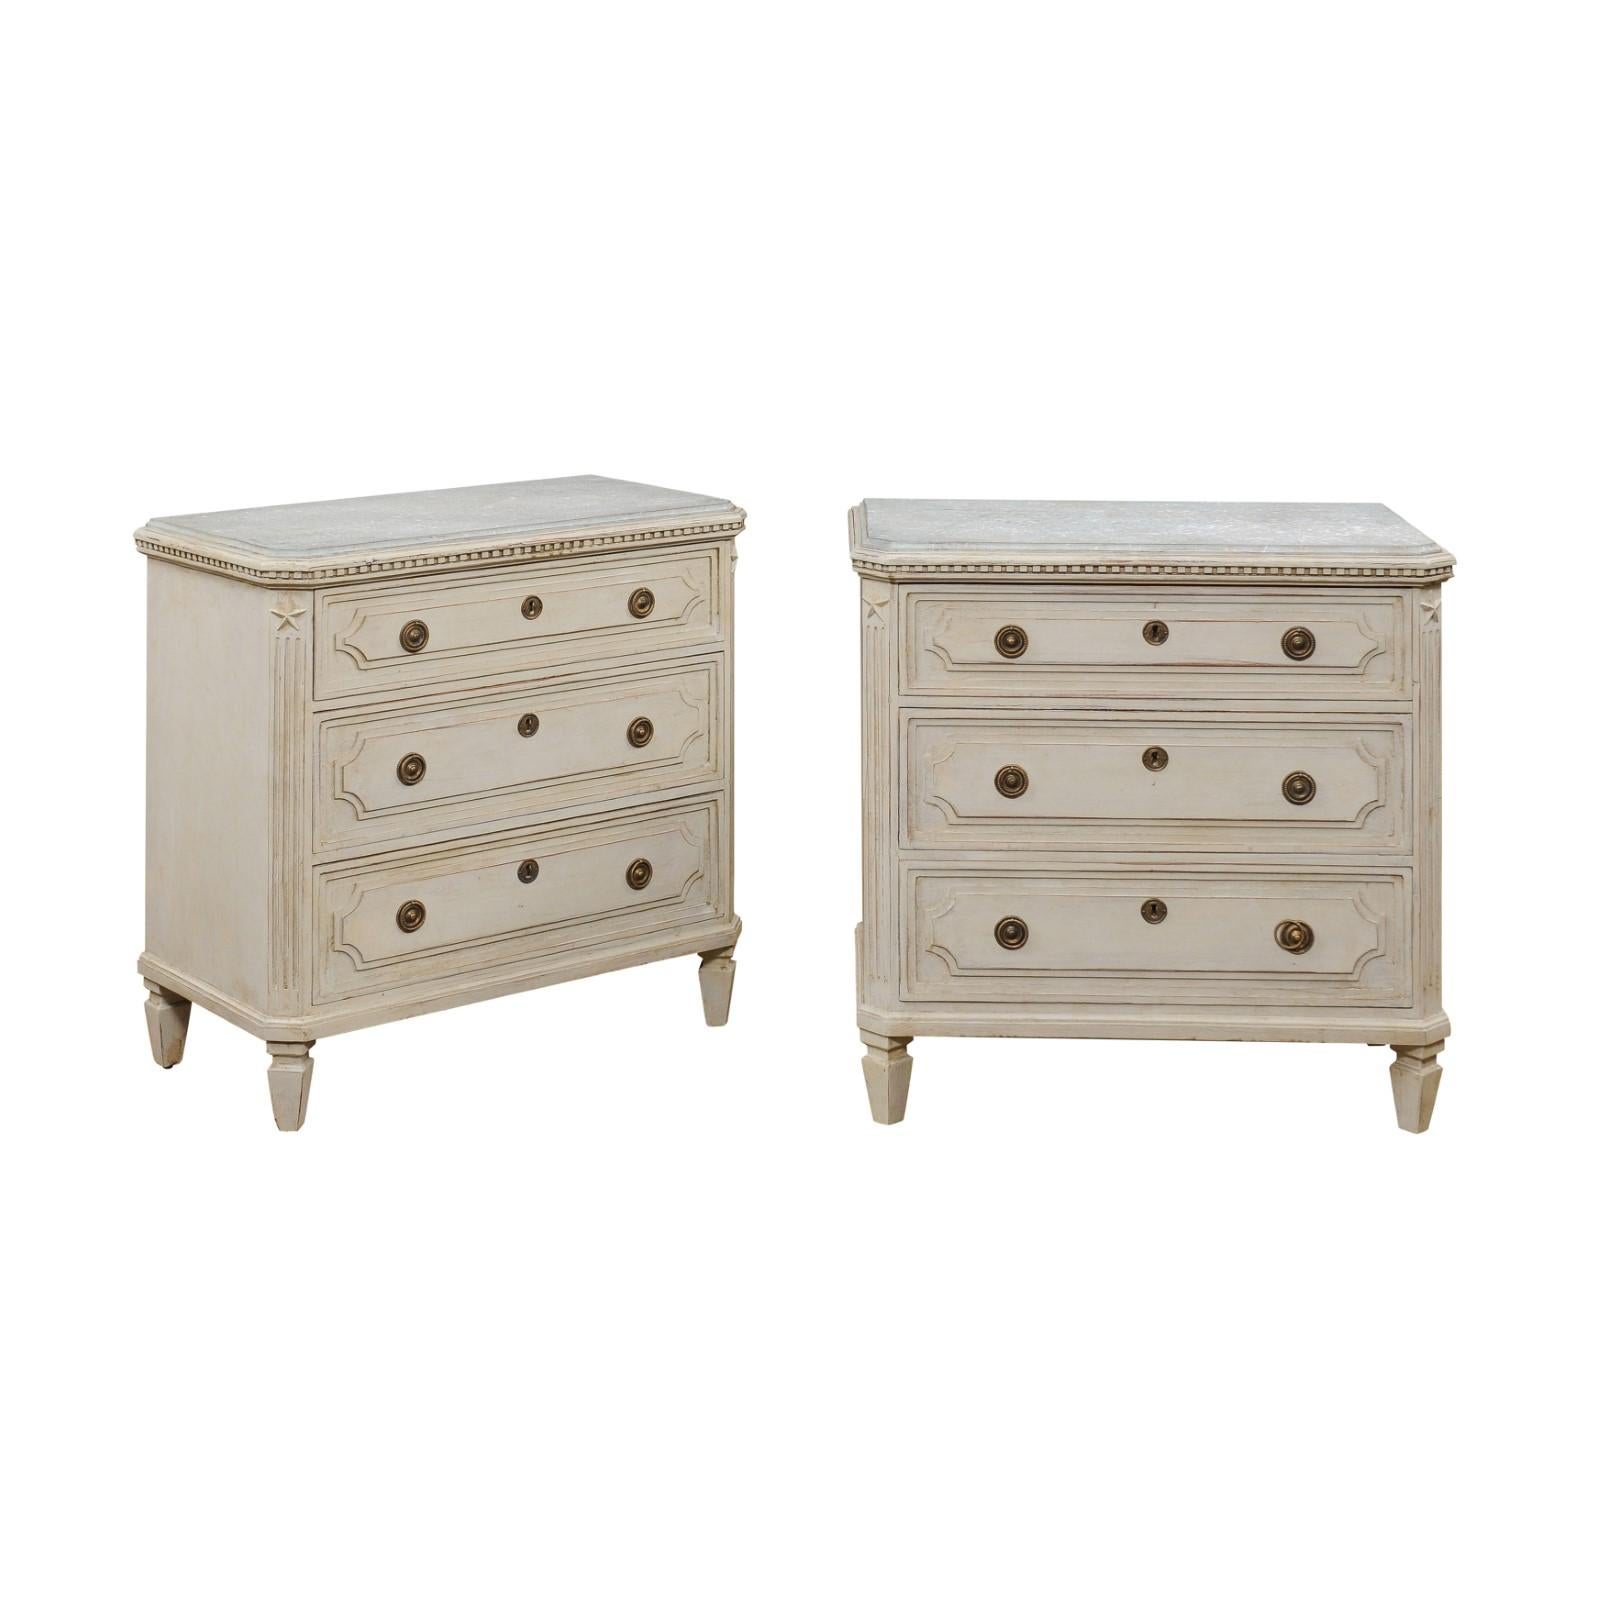 A pair of Swedish Gustavian style painted wood chests from the late 19th century, with marbleized tops, three graduated drawers, dentil molding, carved stars and fluted side posts. Created in Sweden during the last quarter of the 19th century, each